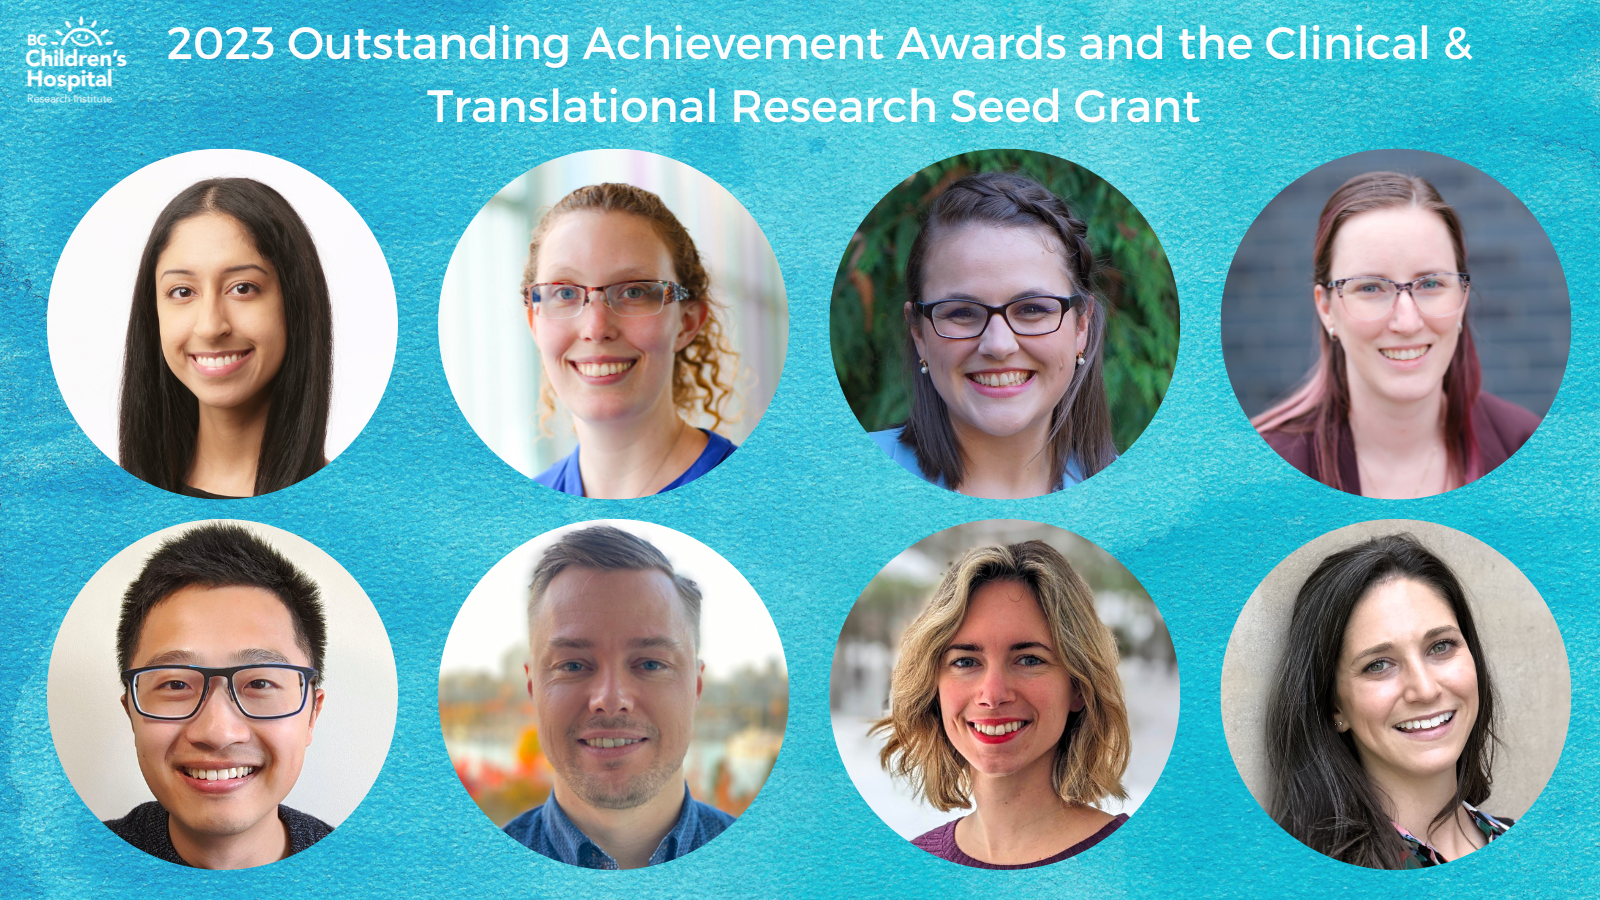 recipients of the 2023 Outstanding Achievement Awards and and the Clinical & Translational Research Seed Grant